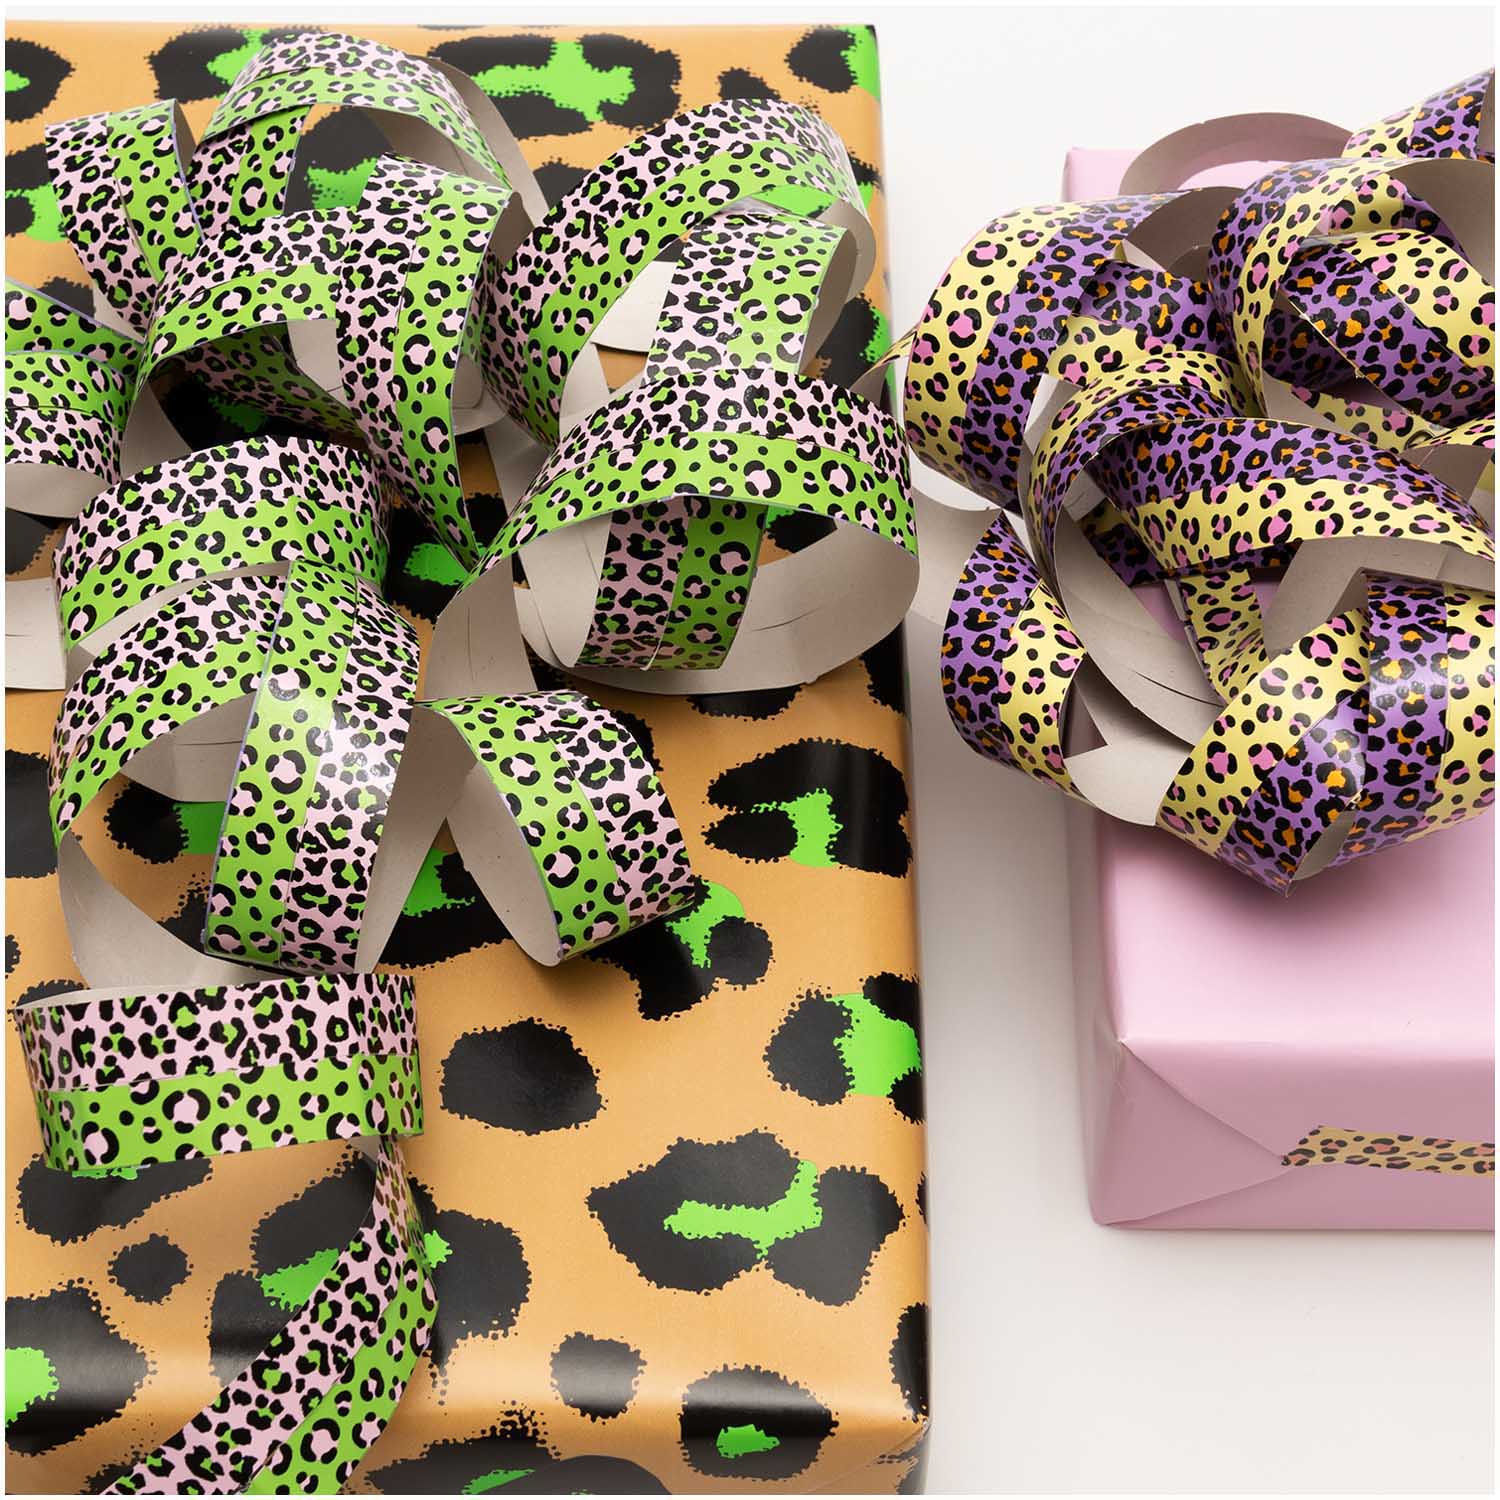 Leopard Print Party Streamers | Throwing Streamers for Parties Rico Design